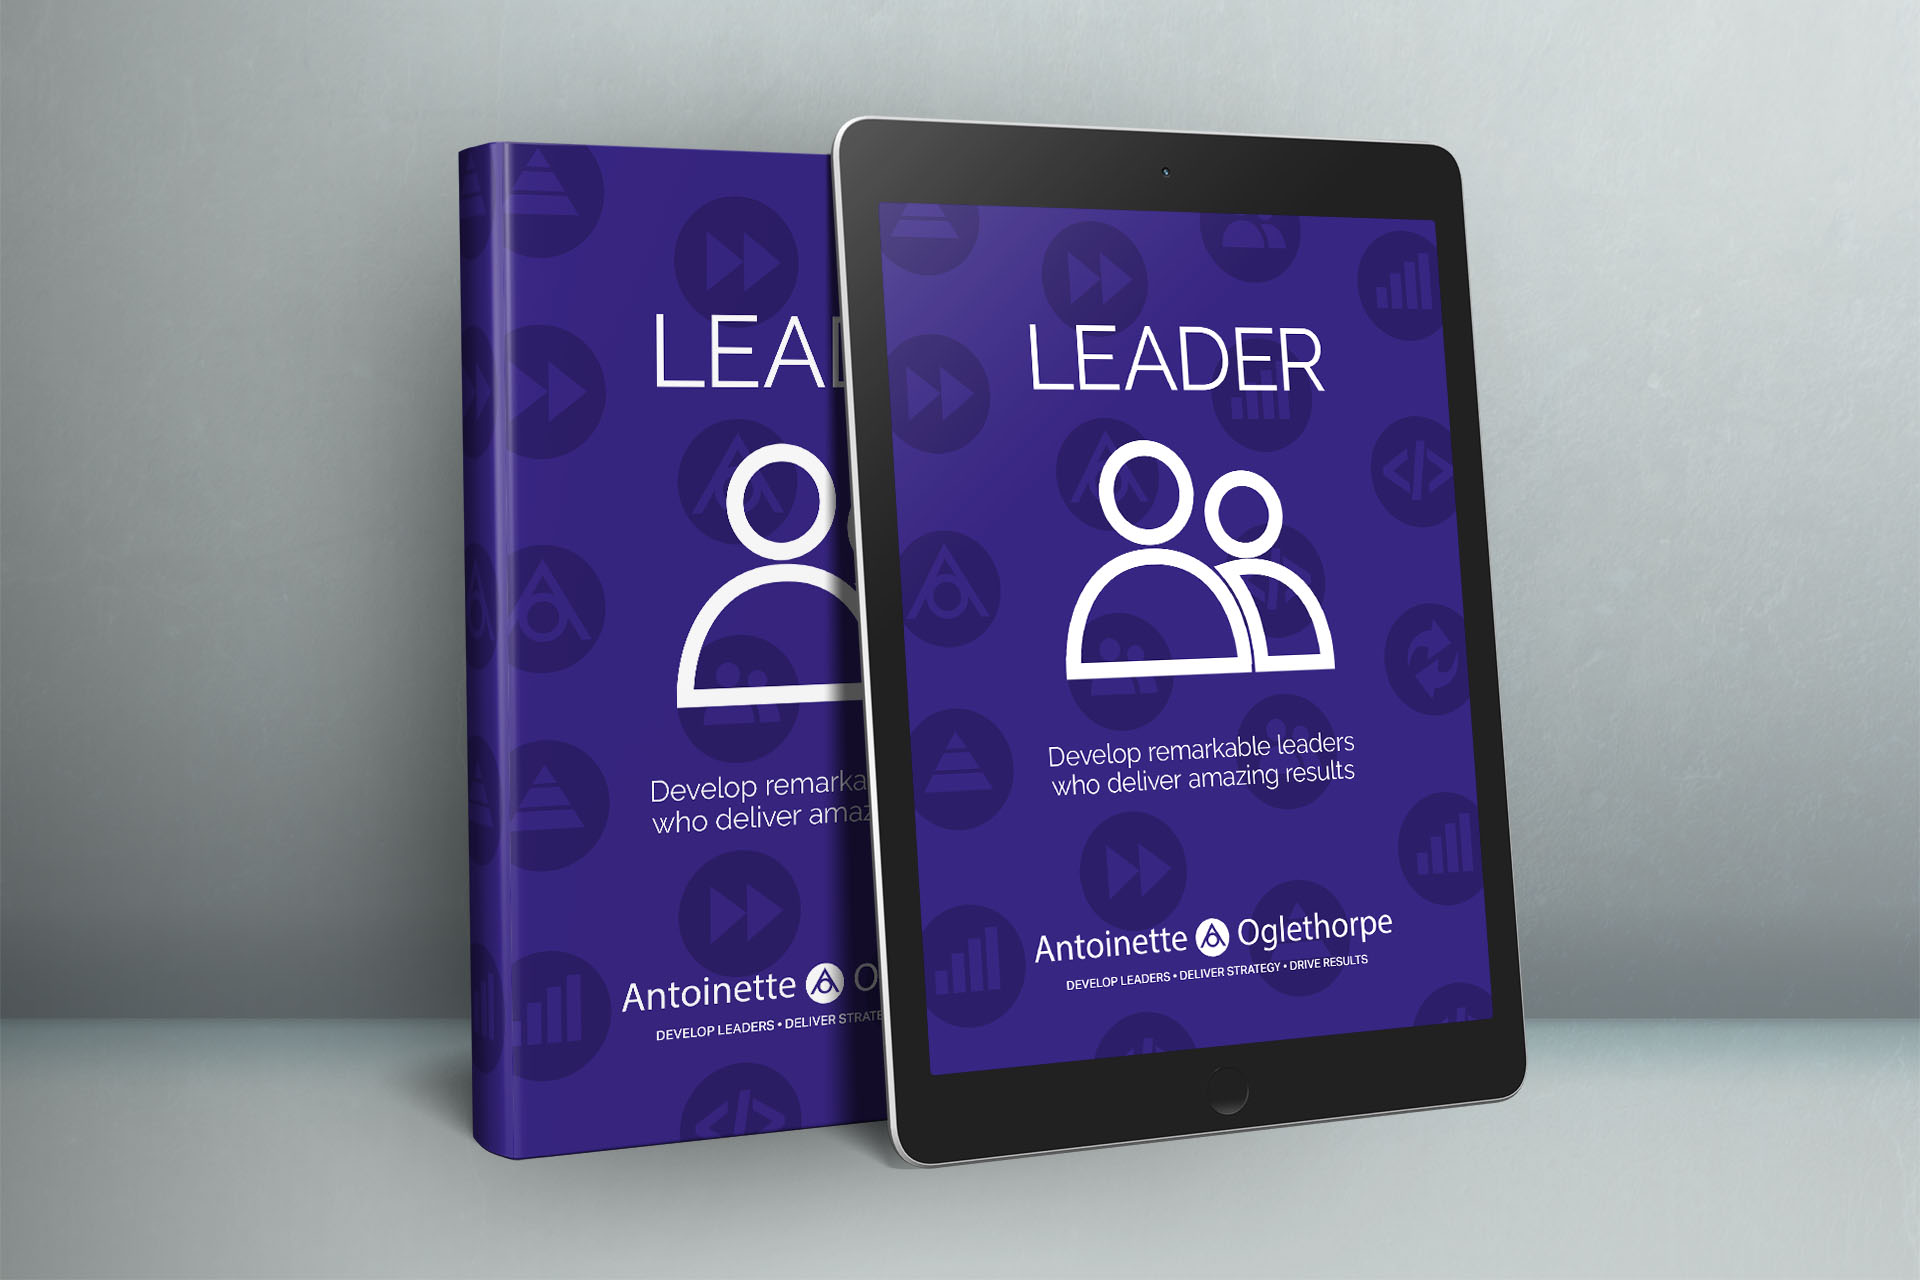 LEADER eBook for Developing Leadership Talent book cover